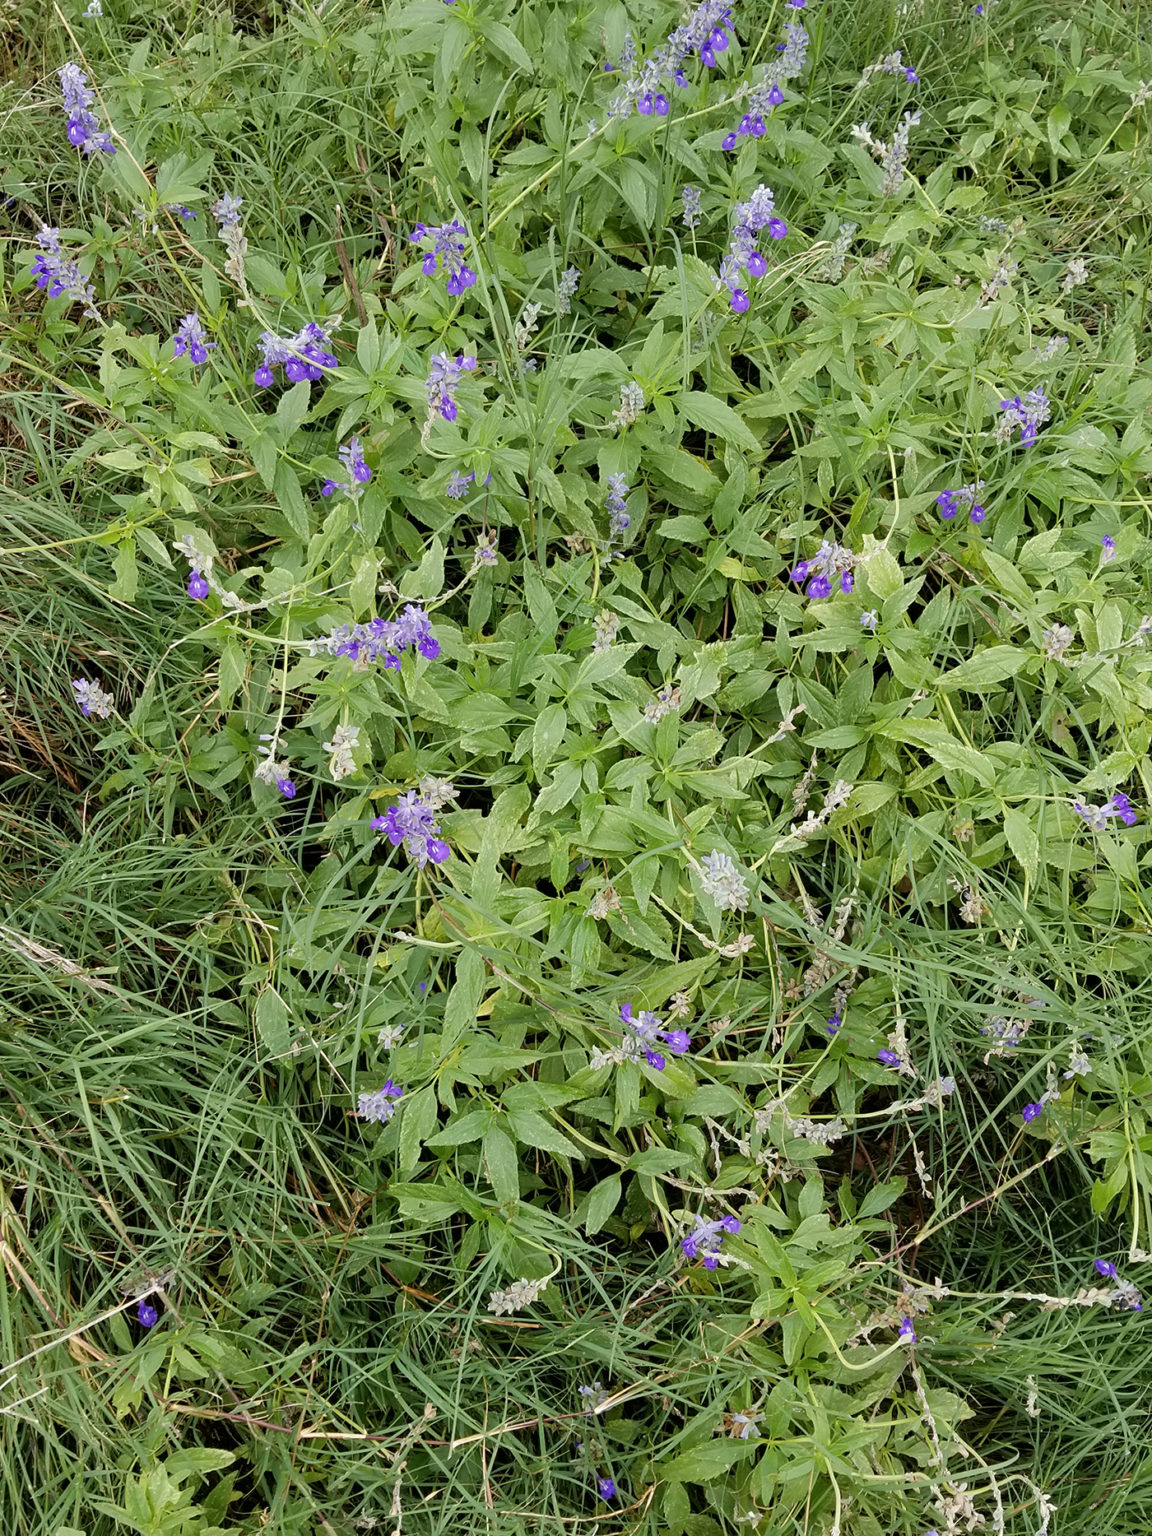 This is mealy blue sage, a Texas native pollinator-attracter plant that grows at the Curry Nature Center just below the trailhead, on the left. This plant blooms from April through October, sometimes into November